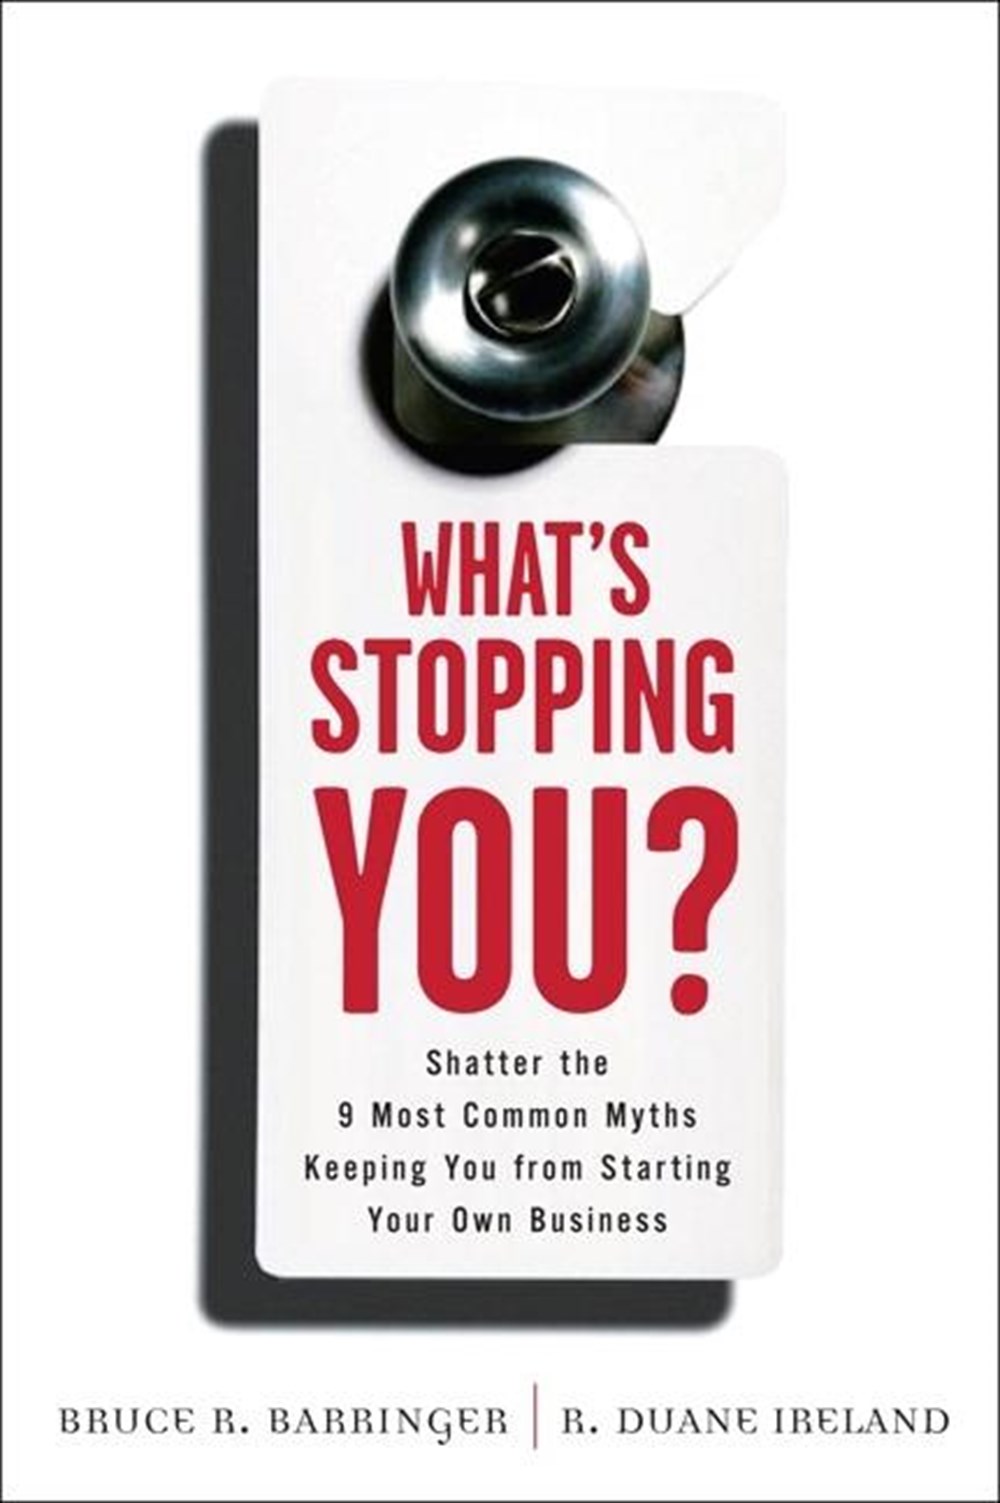 What's Stopping You? Shatter the 9 Most Common Myths Keeping You from Starting Your Own Business